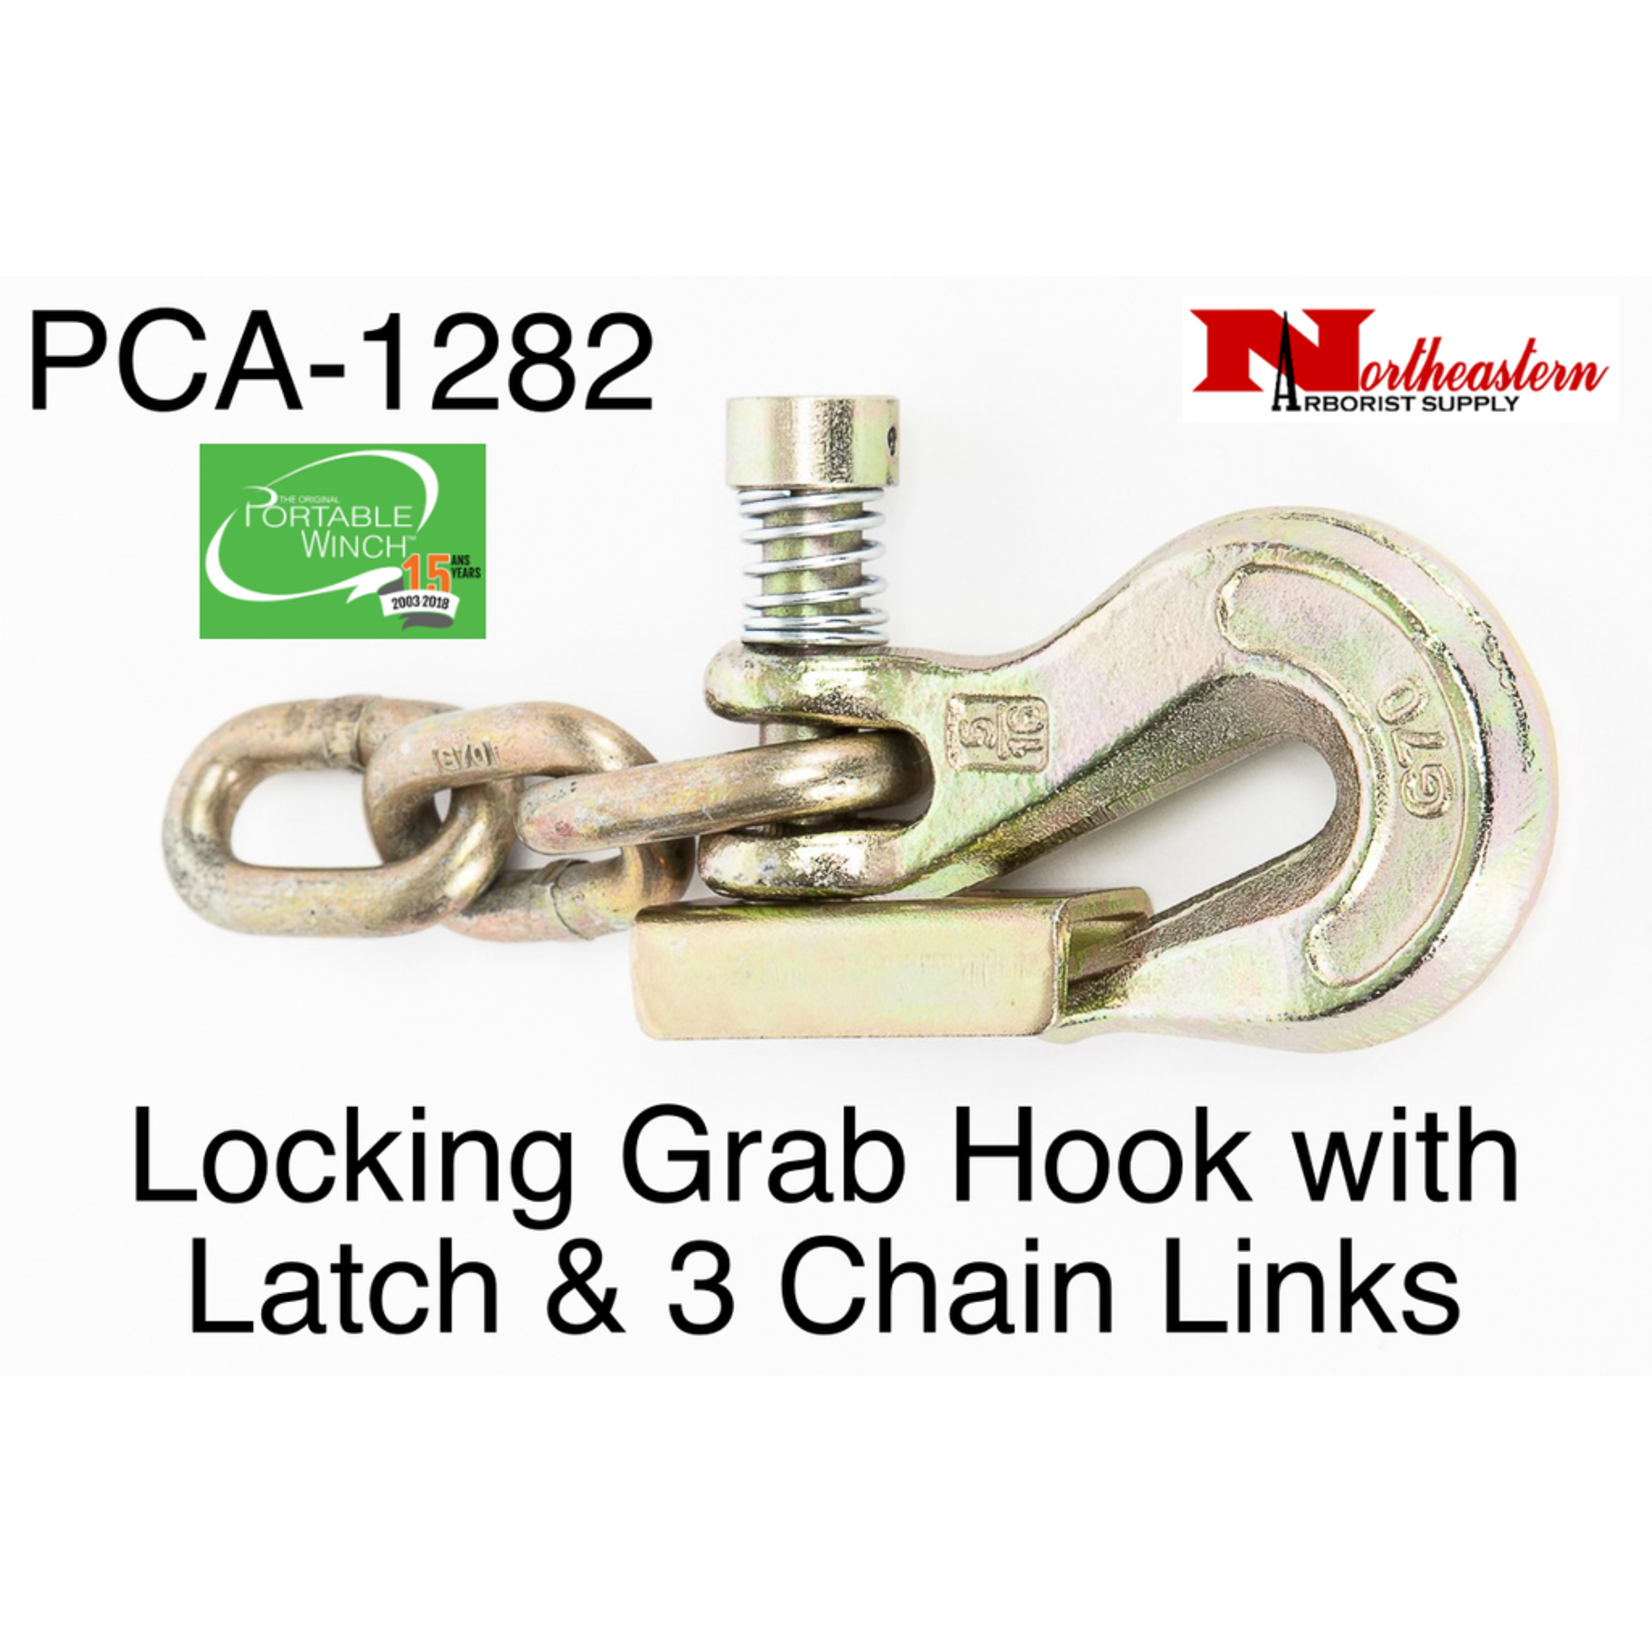 PORTABLE WINCH CO. Grab Hook 5/16" with Latch & 3 Chain Links